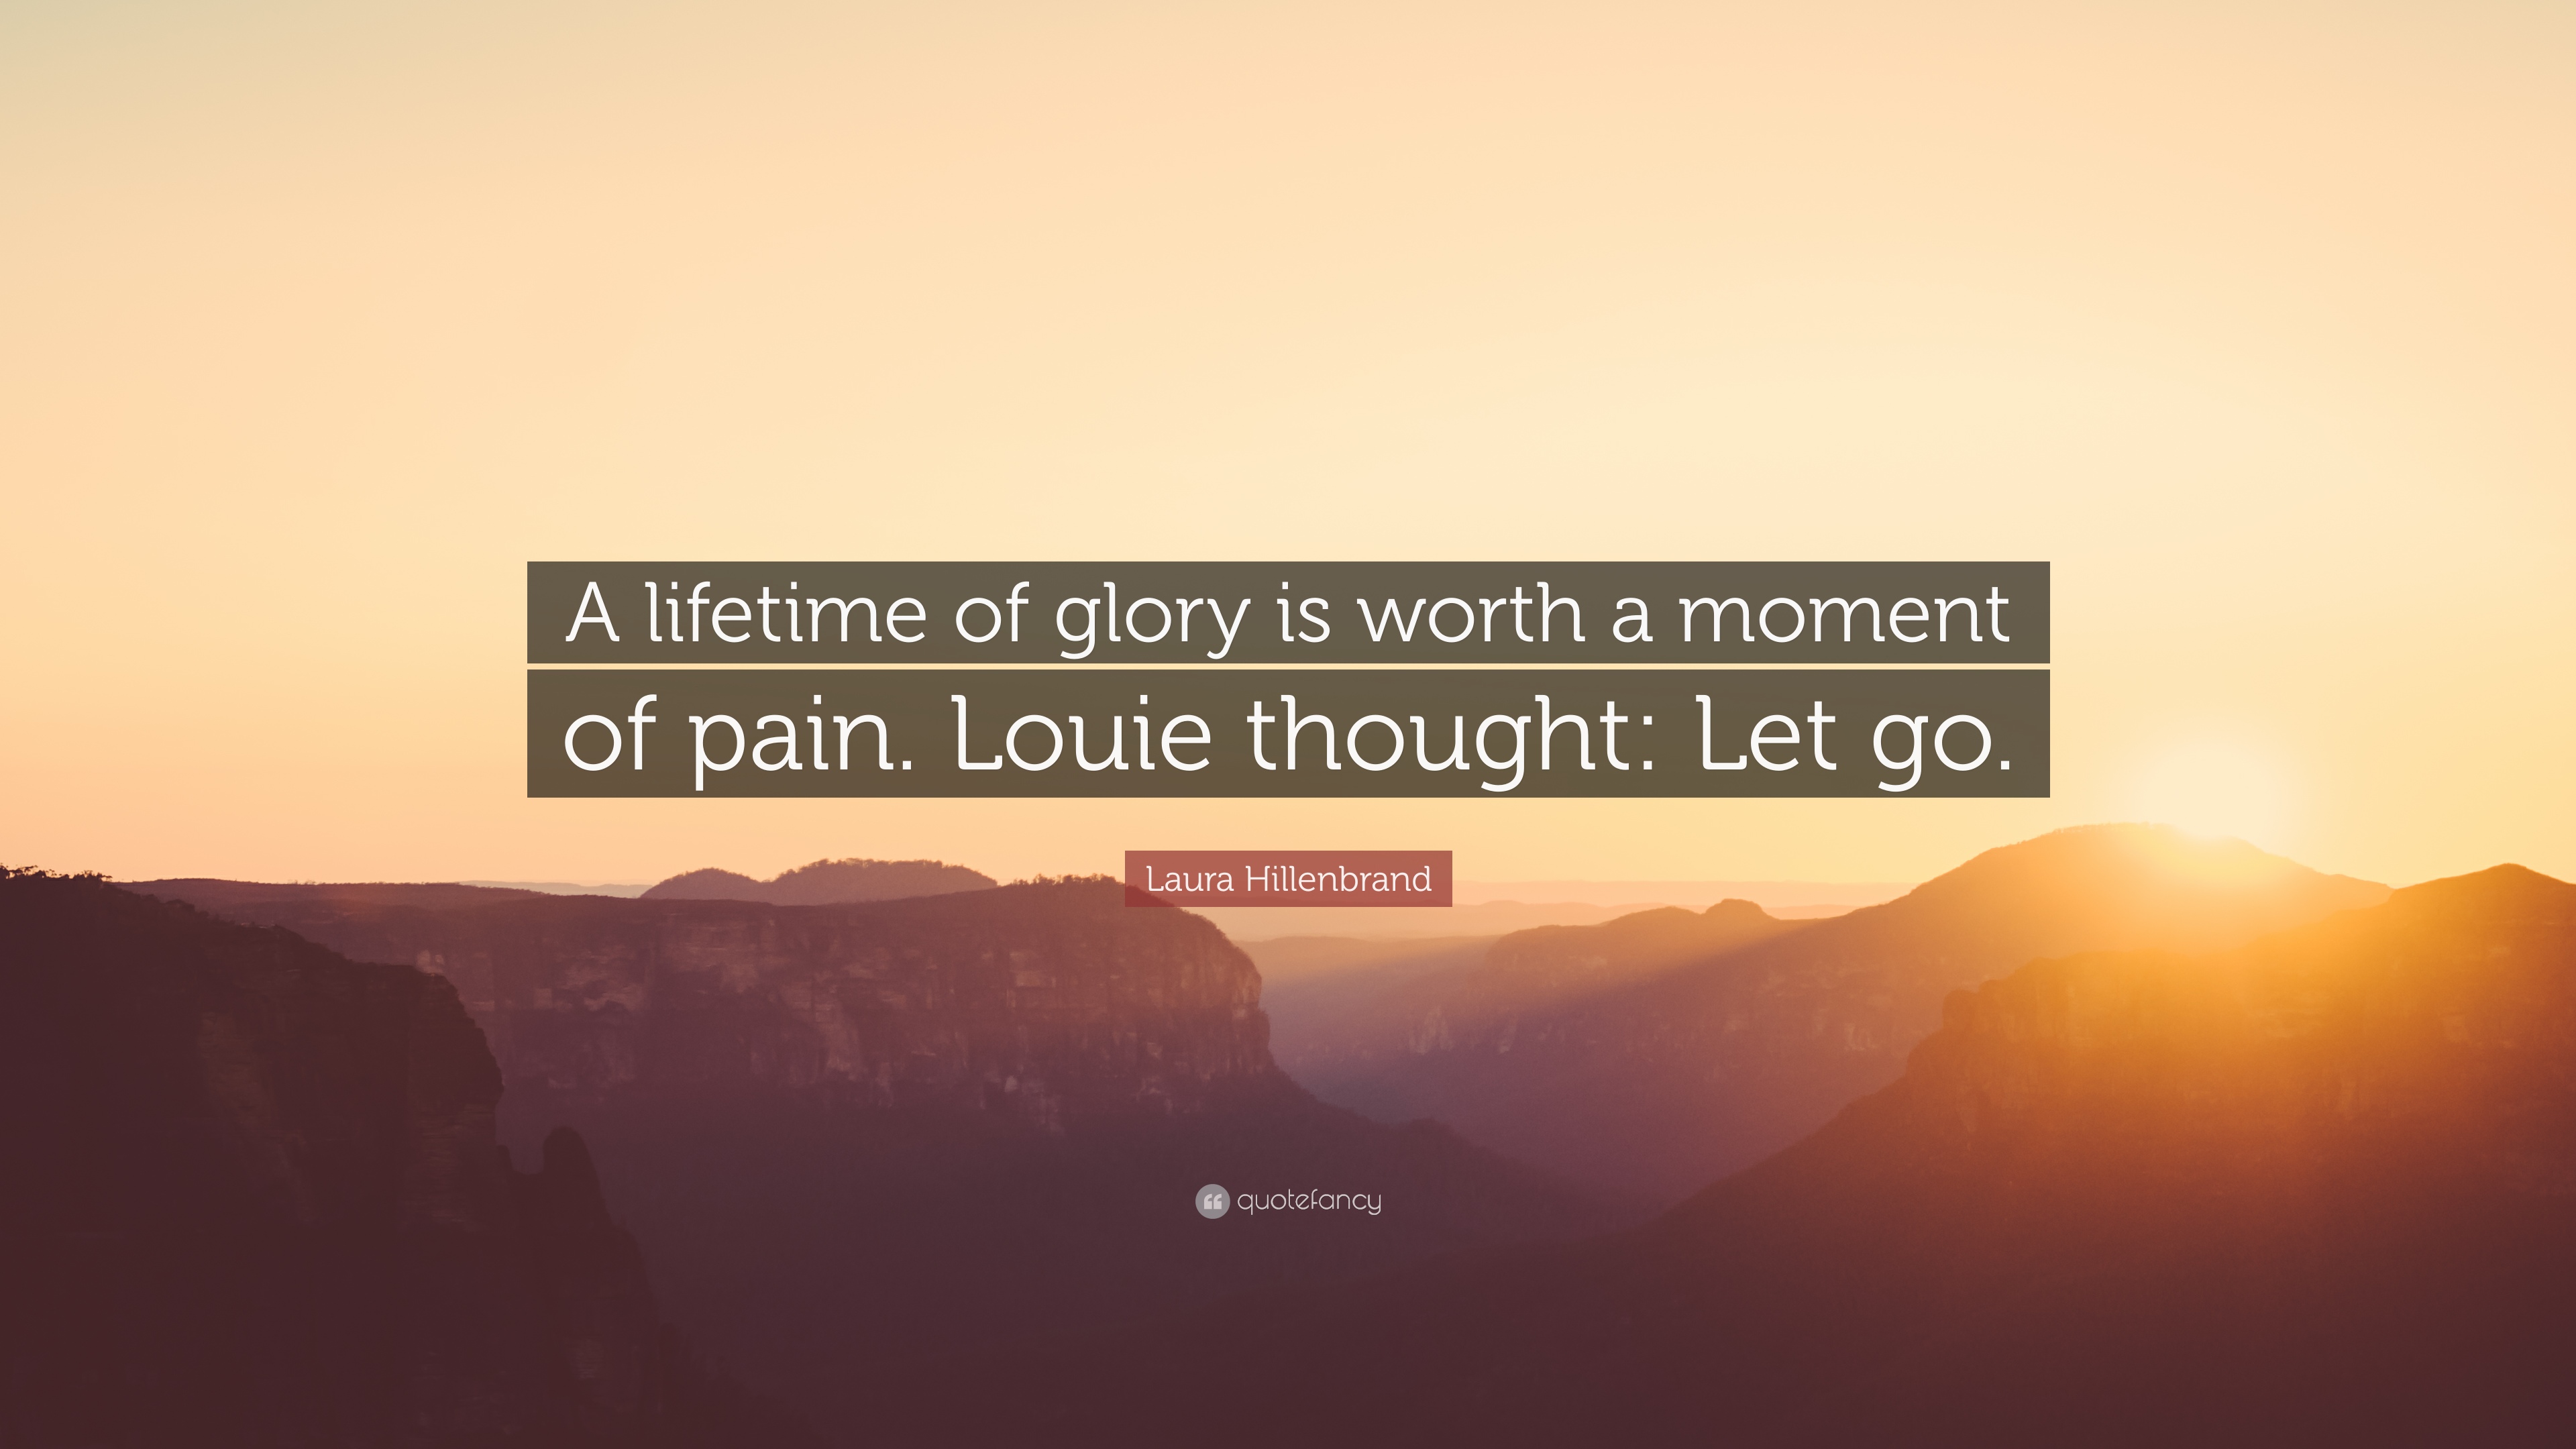 Laura Hillenbrand Quote: “A lifetime of glory is worth a moment of ...